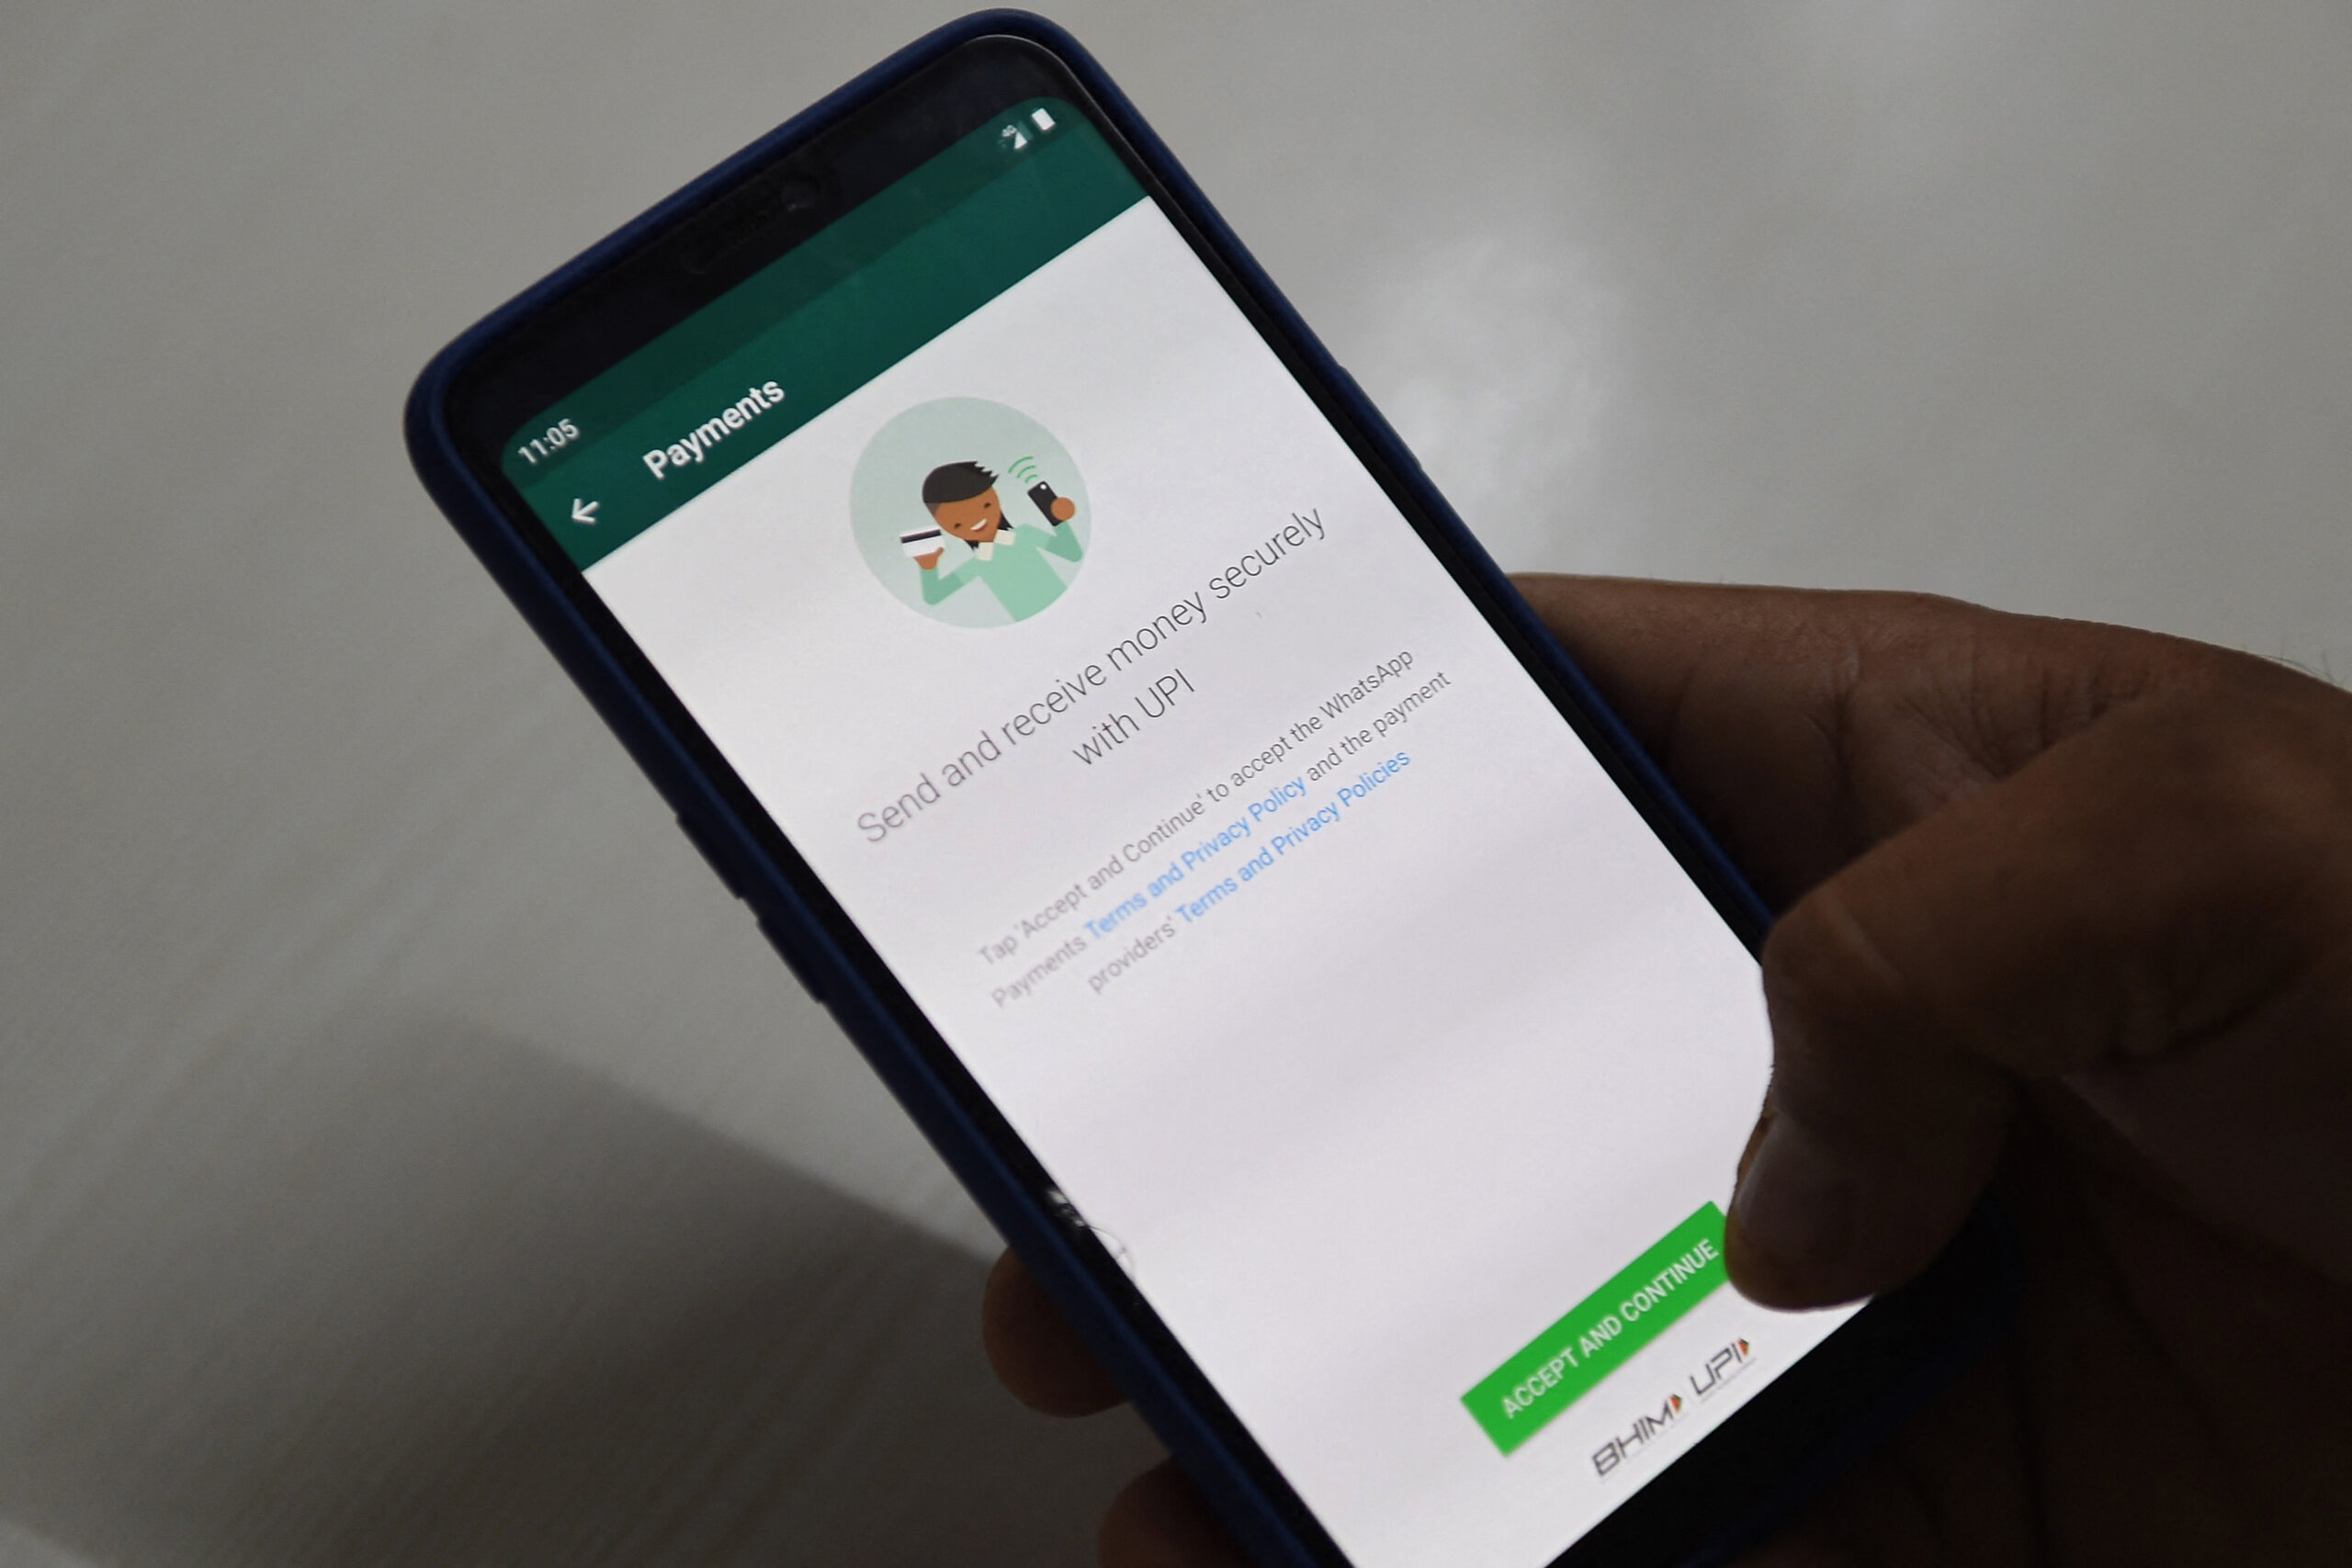 WhatsApp is currently putting an instant payment feature using Pax Dollars (USDP) on trial mode for some users in the US.